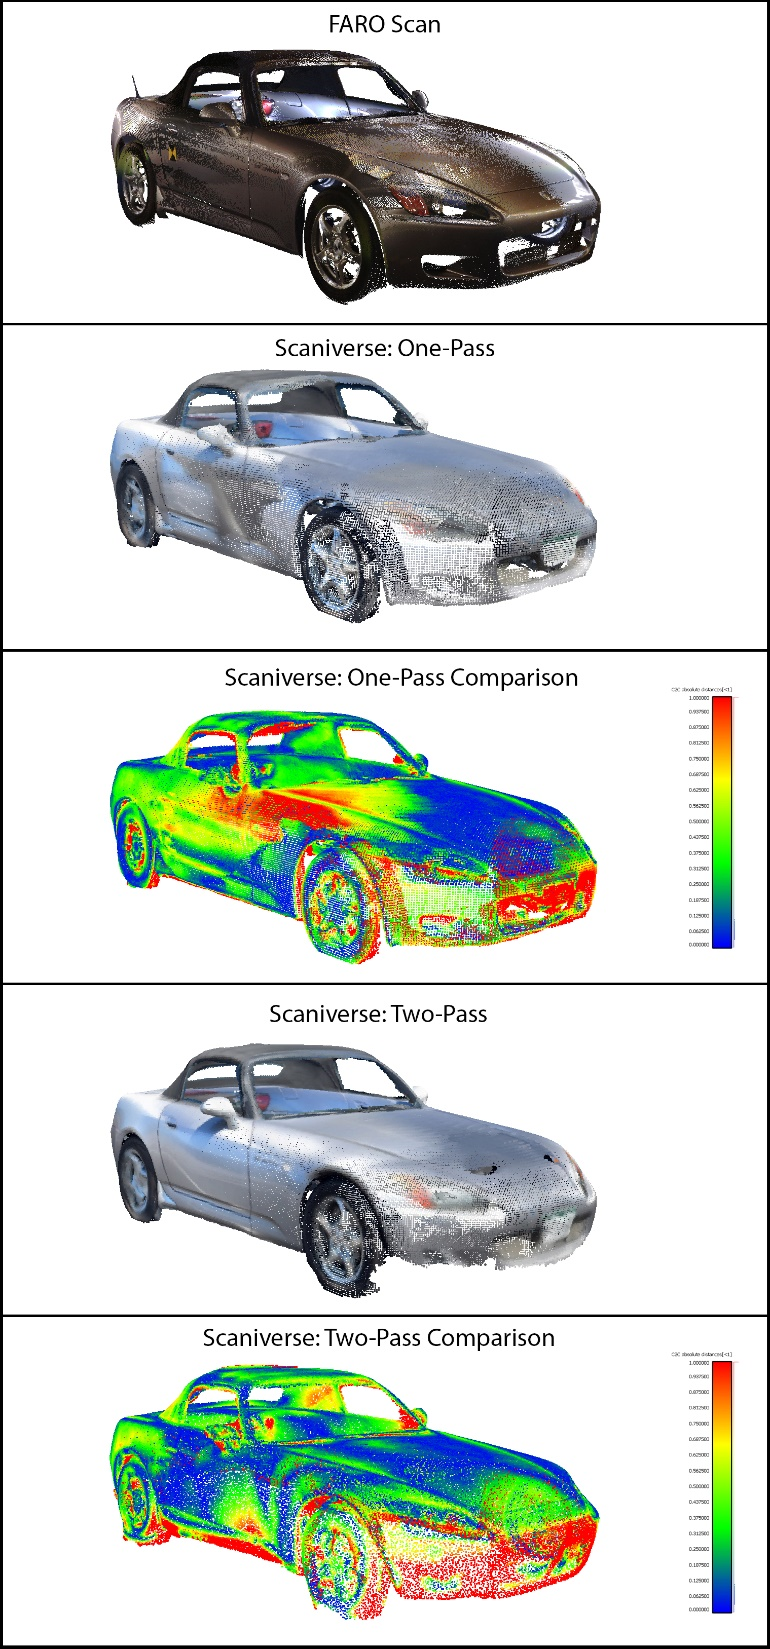 Figure 19 - A visual comparison of the Scaniverse vs. FARO, Grey 2003 Honda S2000 scans: Blue = .25 inches or less in variance. Red = greater than .75 inches in variance.